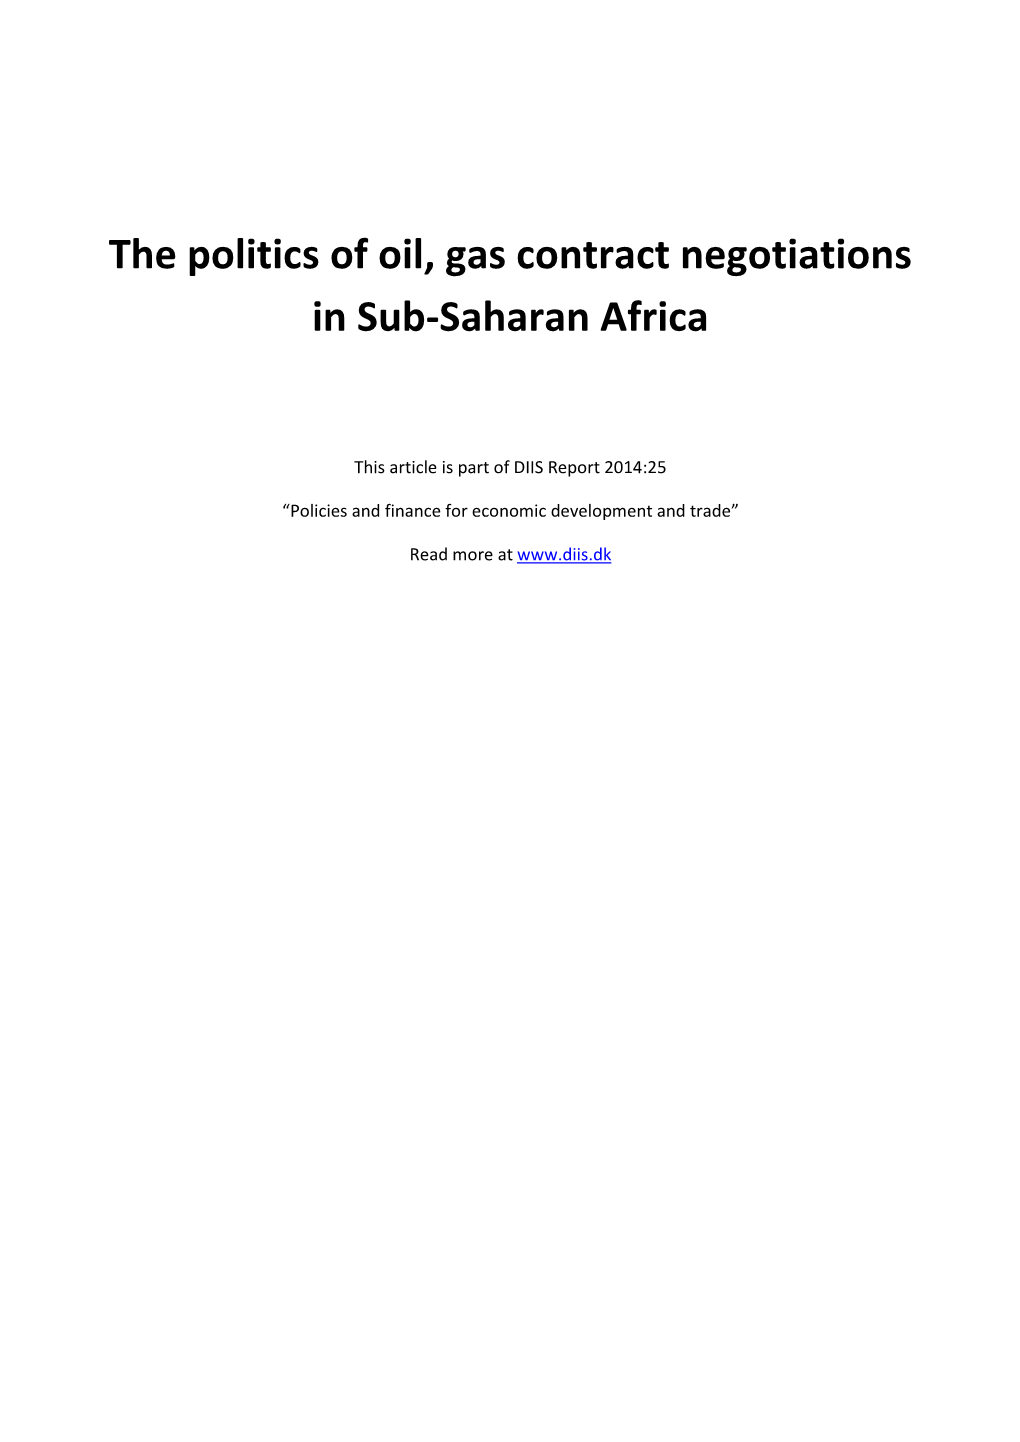 The Politics of Oil, Gas Contract Negotiations in Sub-Saharan Africa